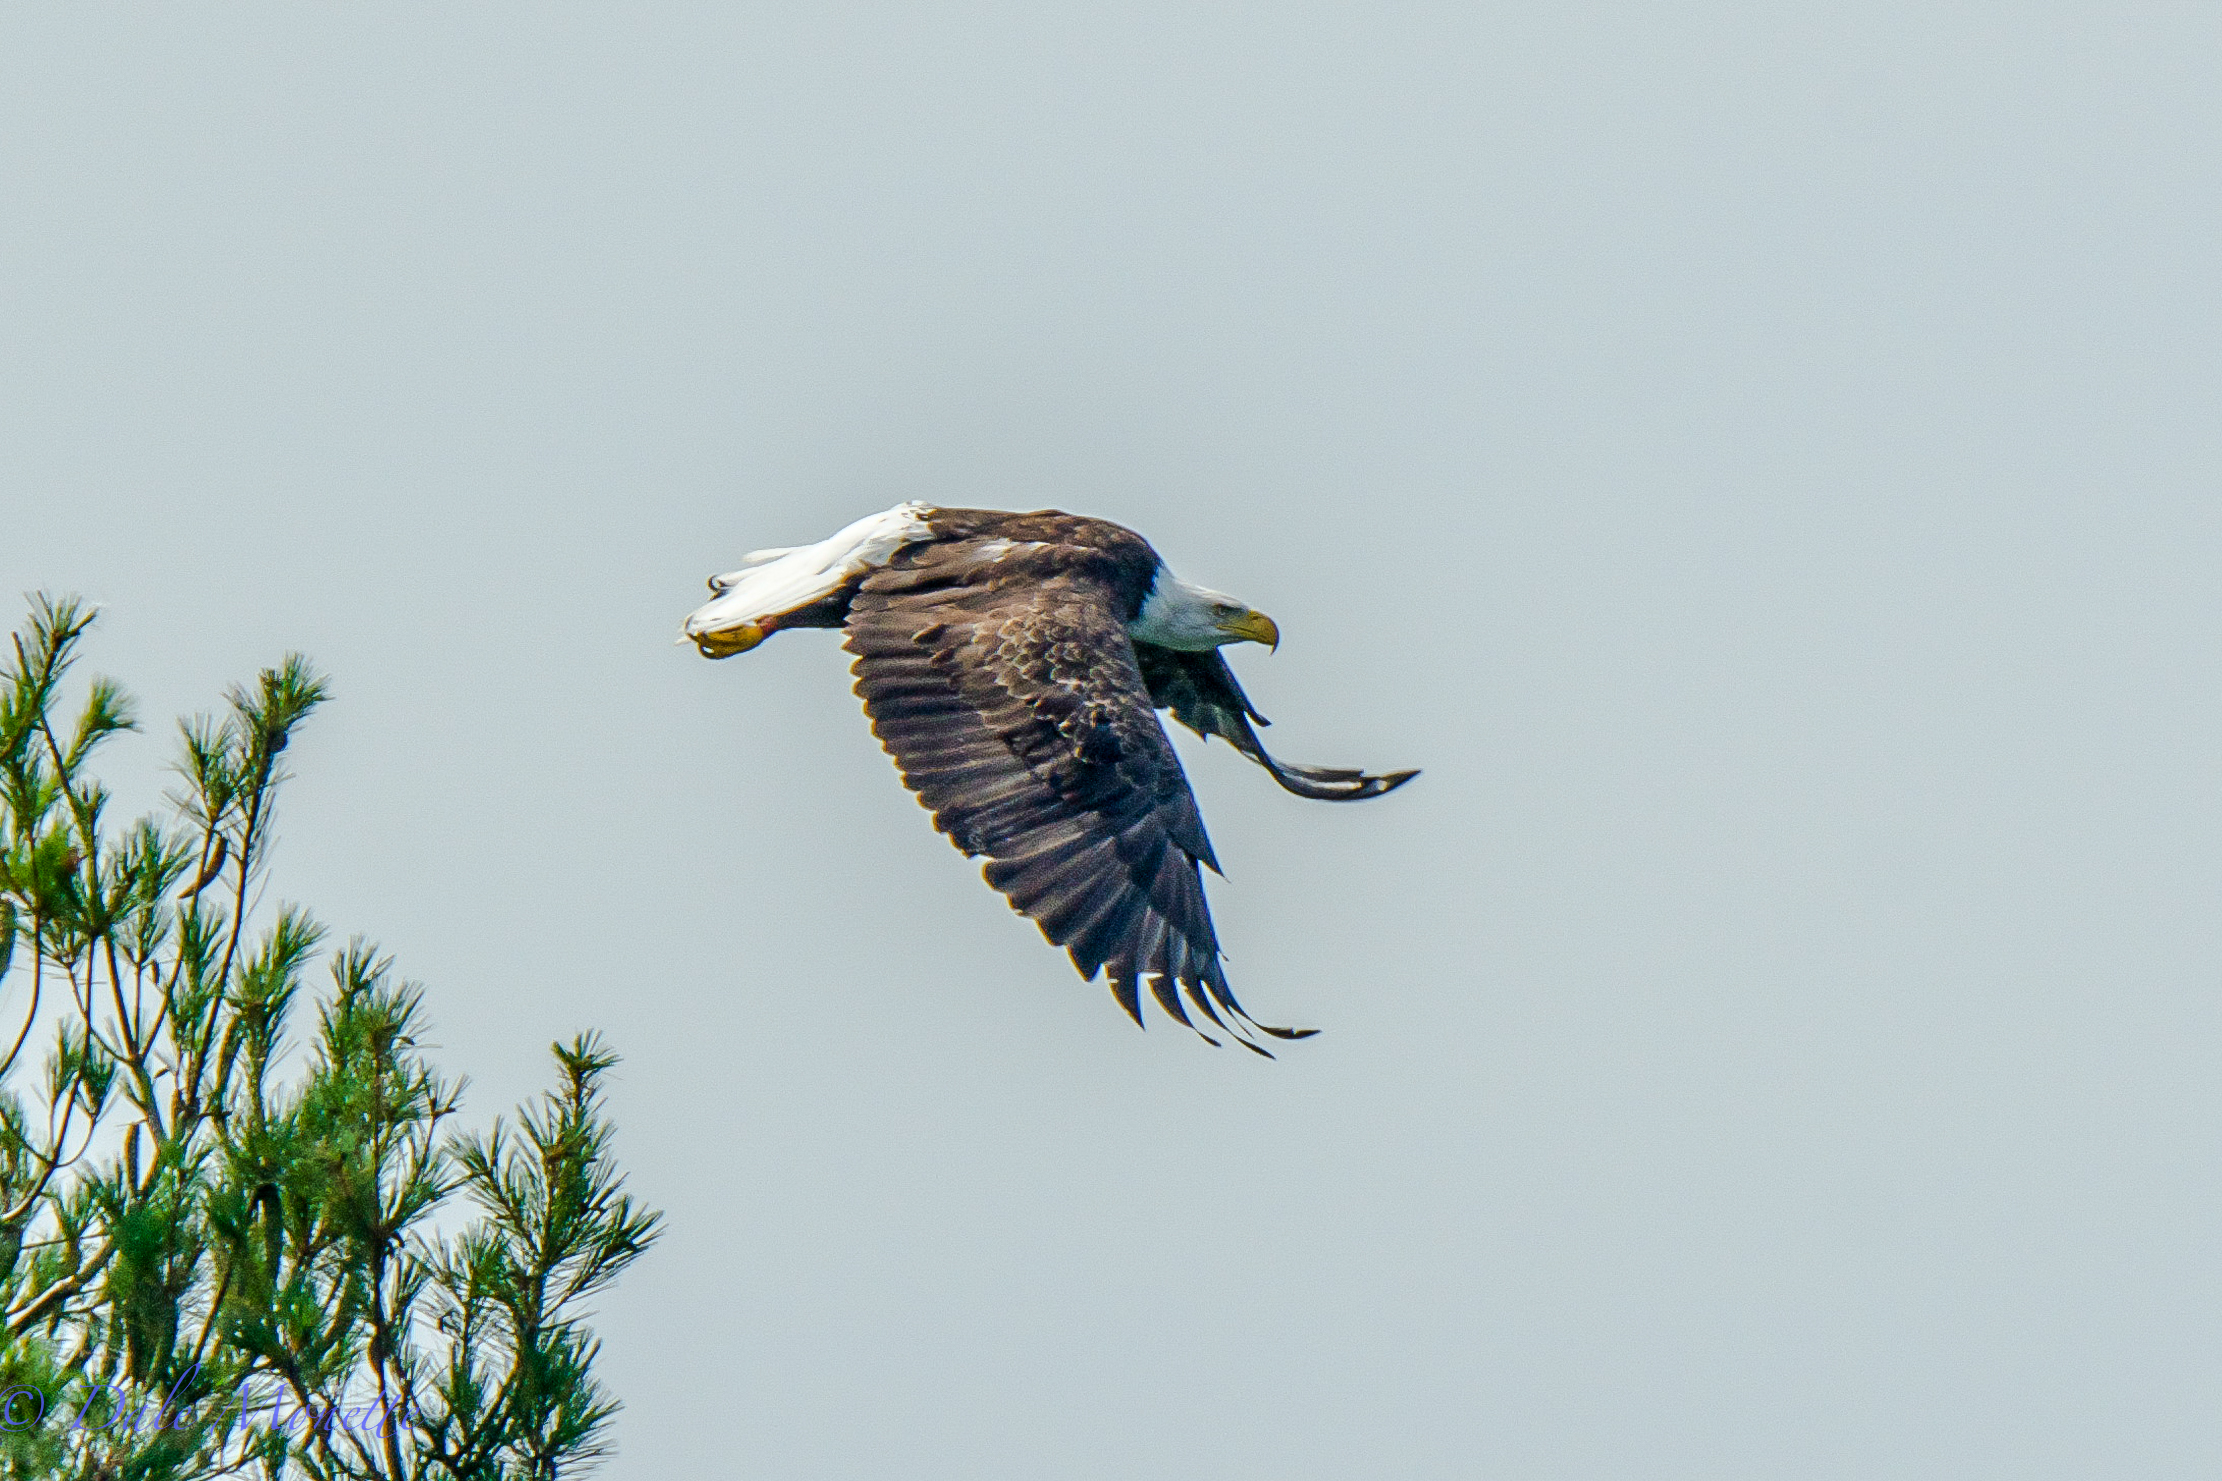   A bald eagle leaps from a small pine tree on a small island at Quabbin. &nbsp;These hot days they really don't like to fly I'll bet ! &nbsp; &nbsp;7/29/15  